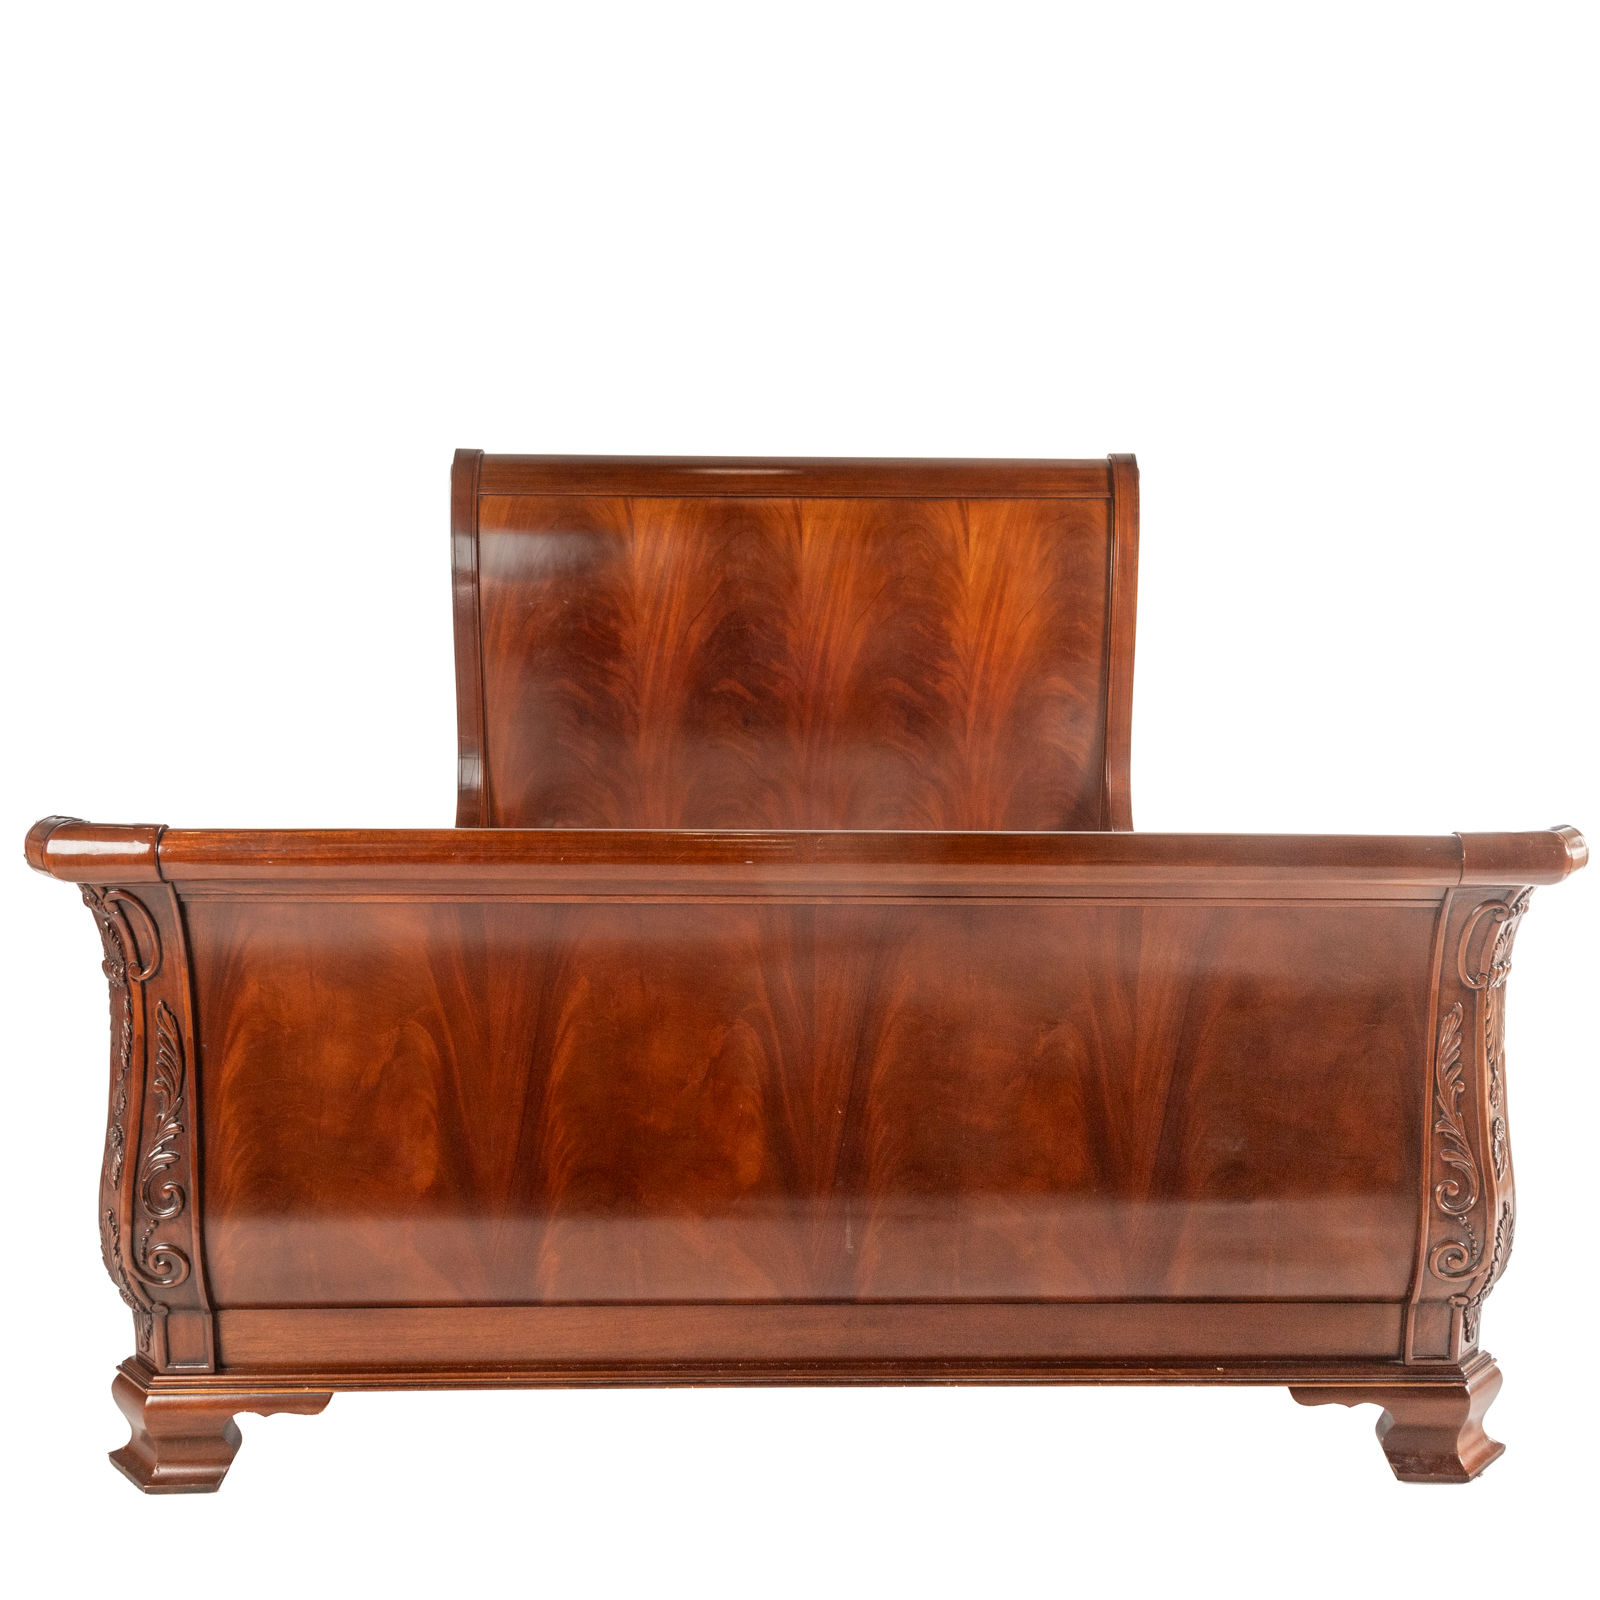 HICKORY CHAIR CARVED MAHOGANY QUEEN 369413